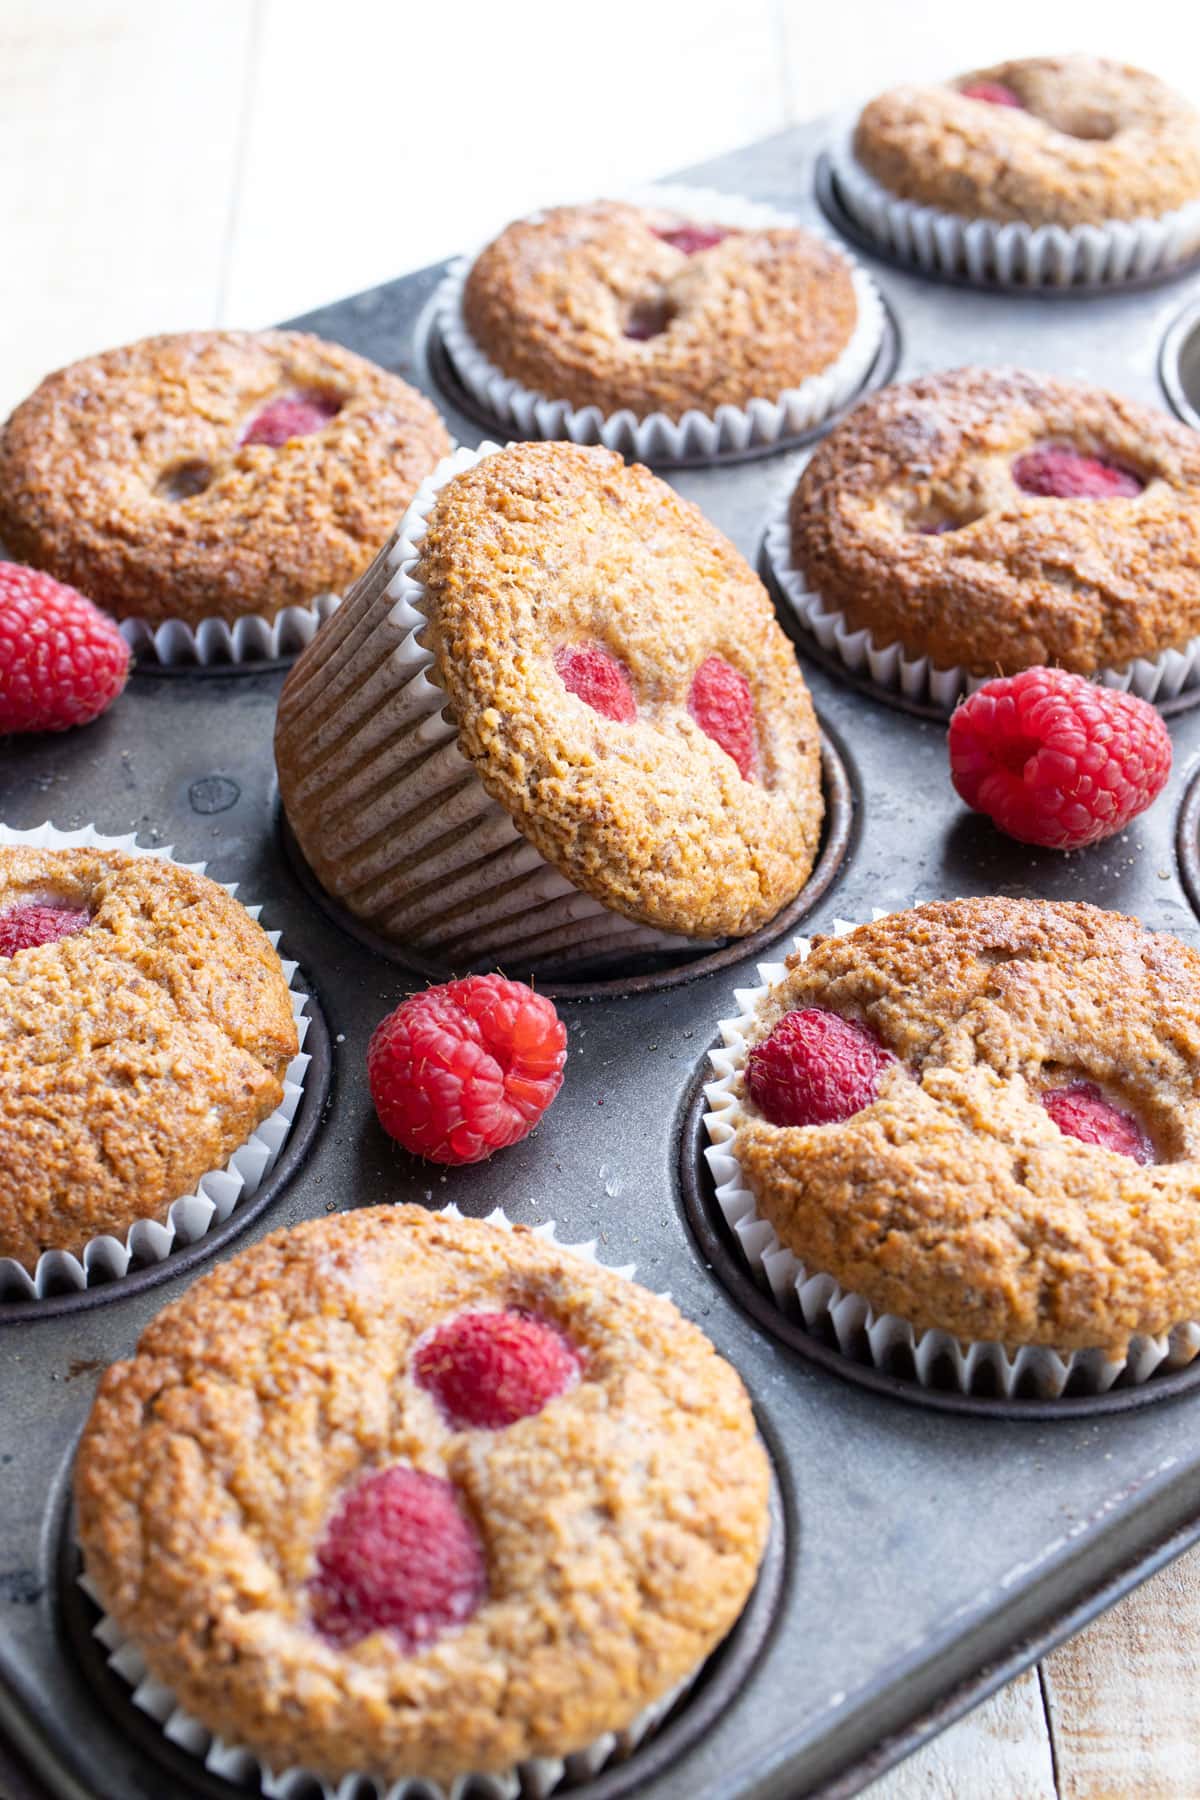 A muffin pan filled with raspberry studded muffins.